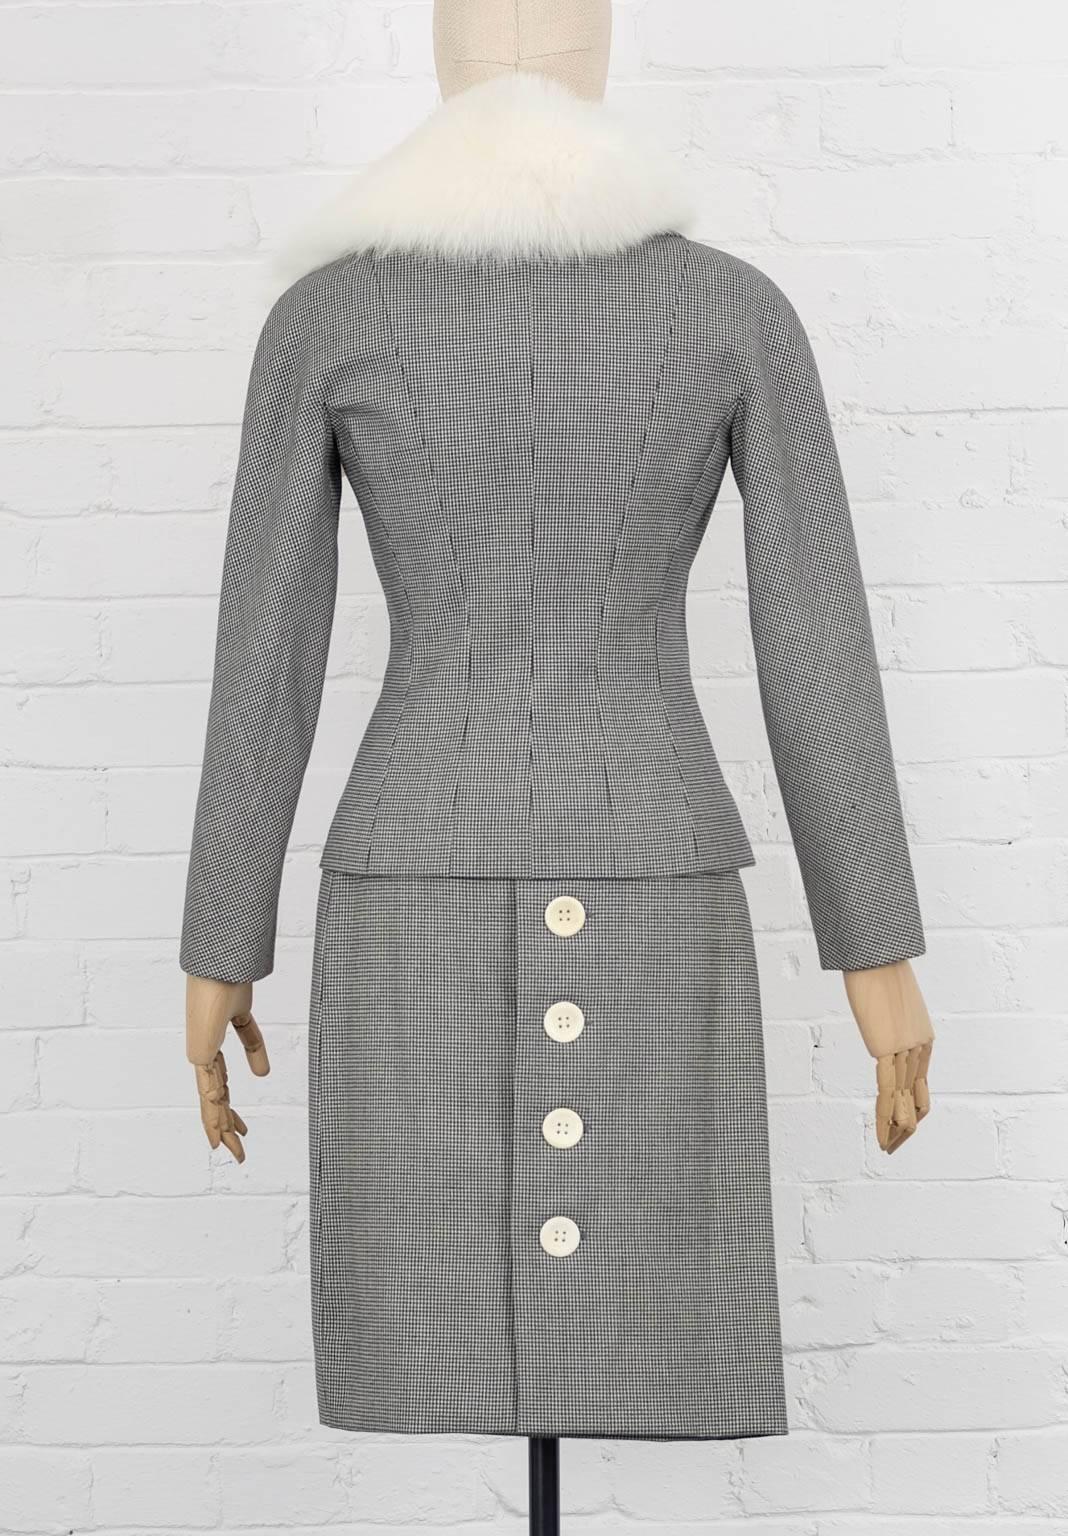 1990's CHRISTIAN DIOR by John Galliano Houndstooth fox fur jacket and skirt suit In Excellent Condition For Sale In London, GB